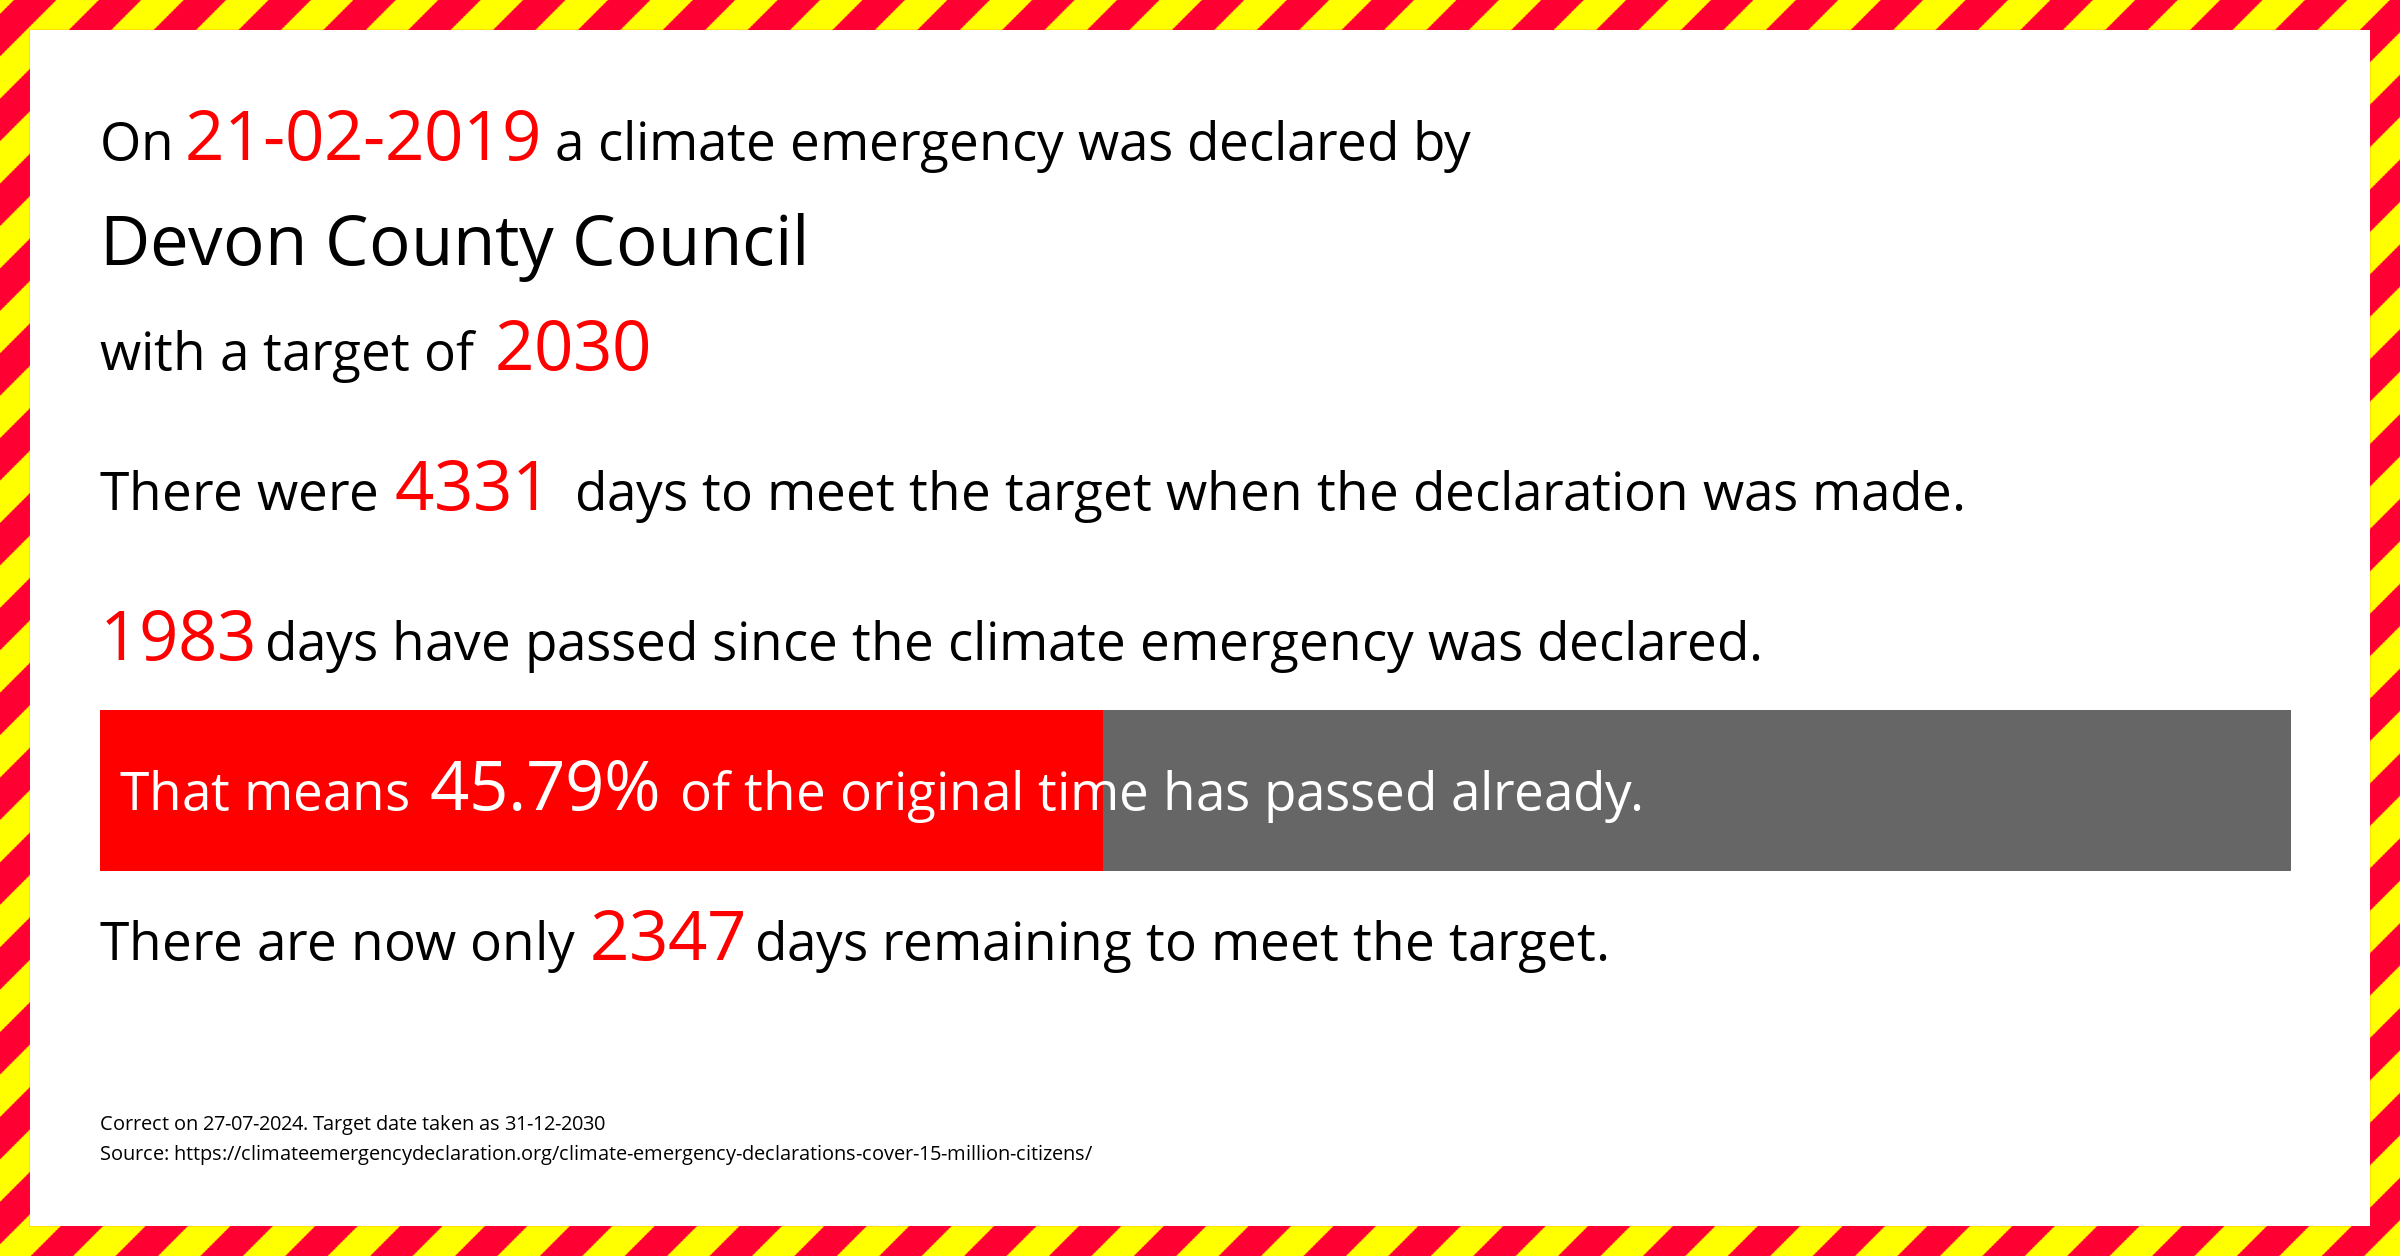 Devon County Council declared a Climate emergency on Thursday 21st February 2019, with a target of 2030.